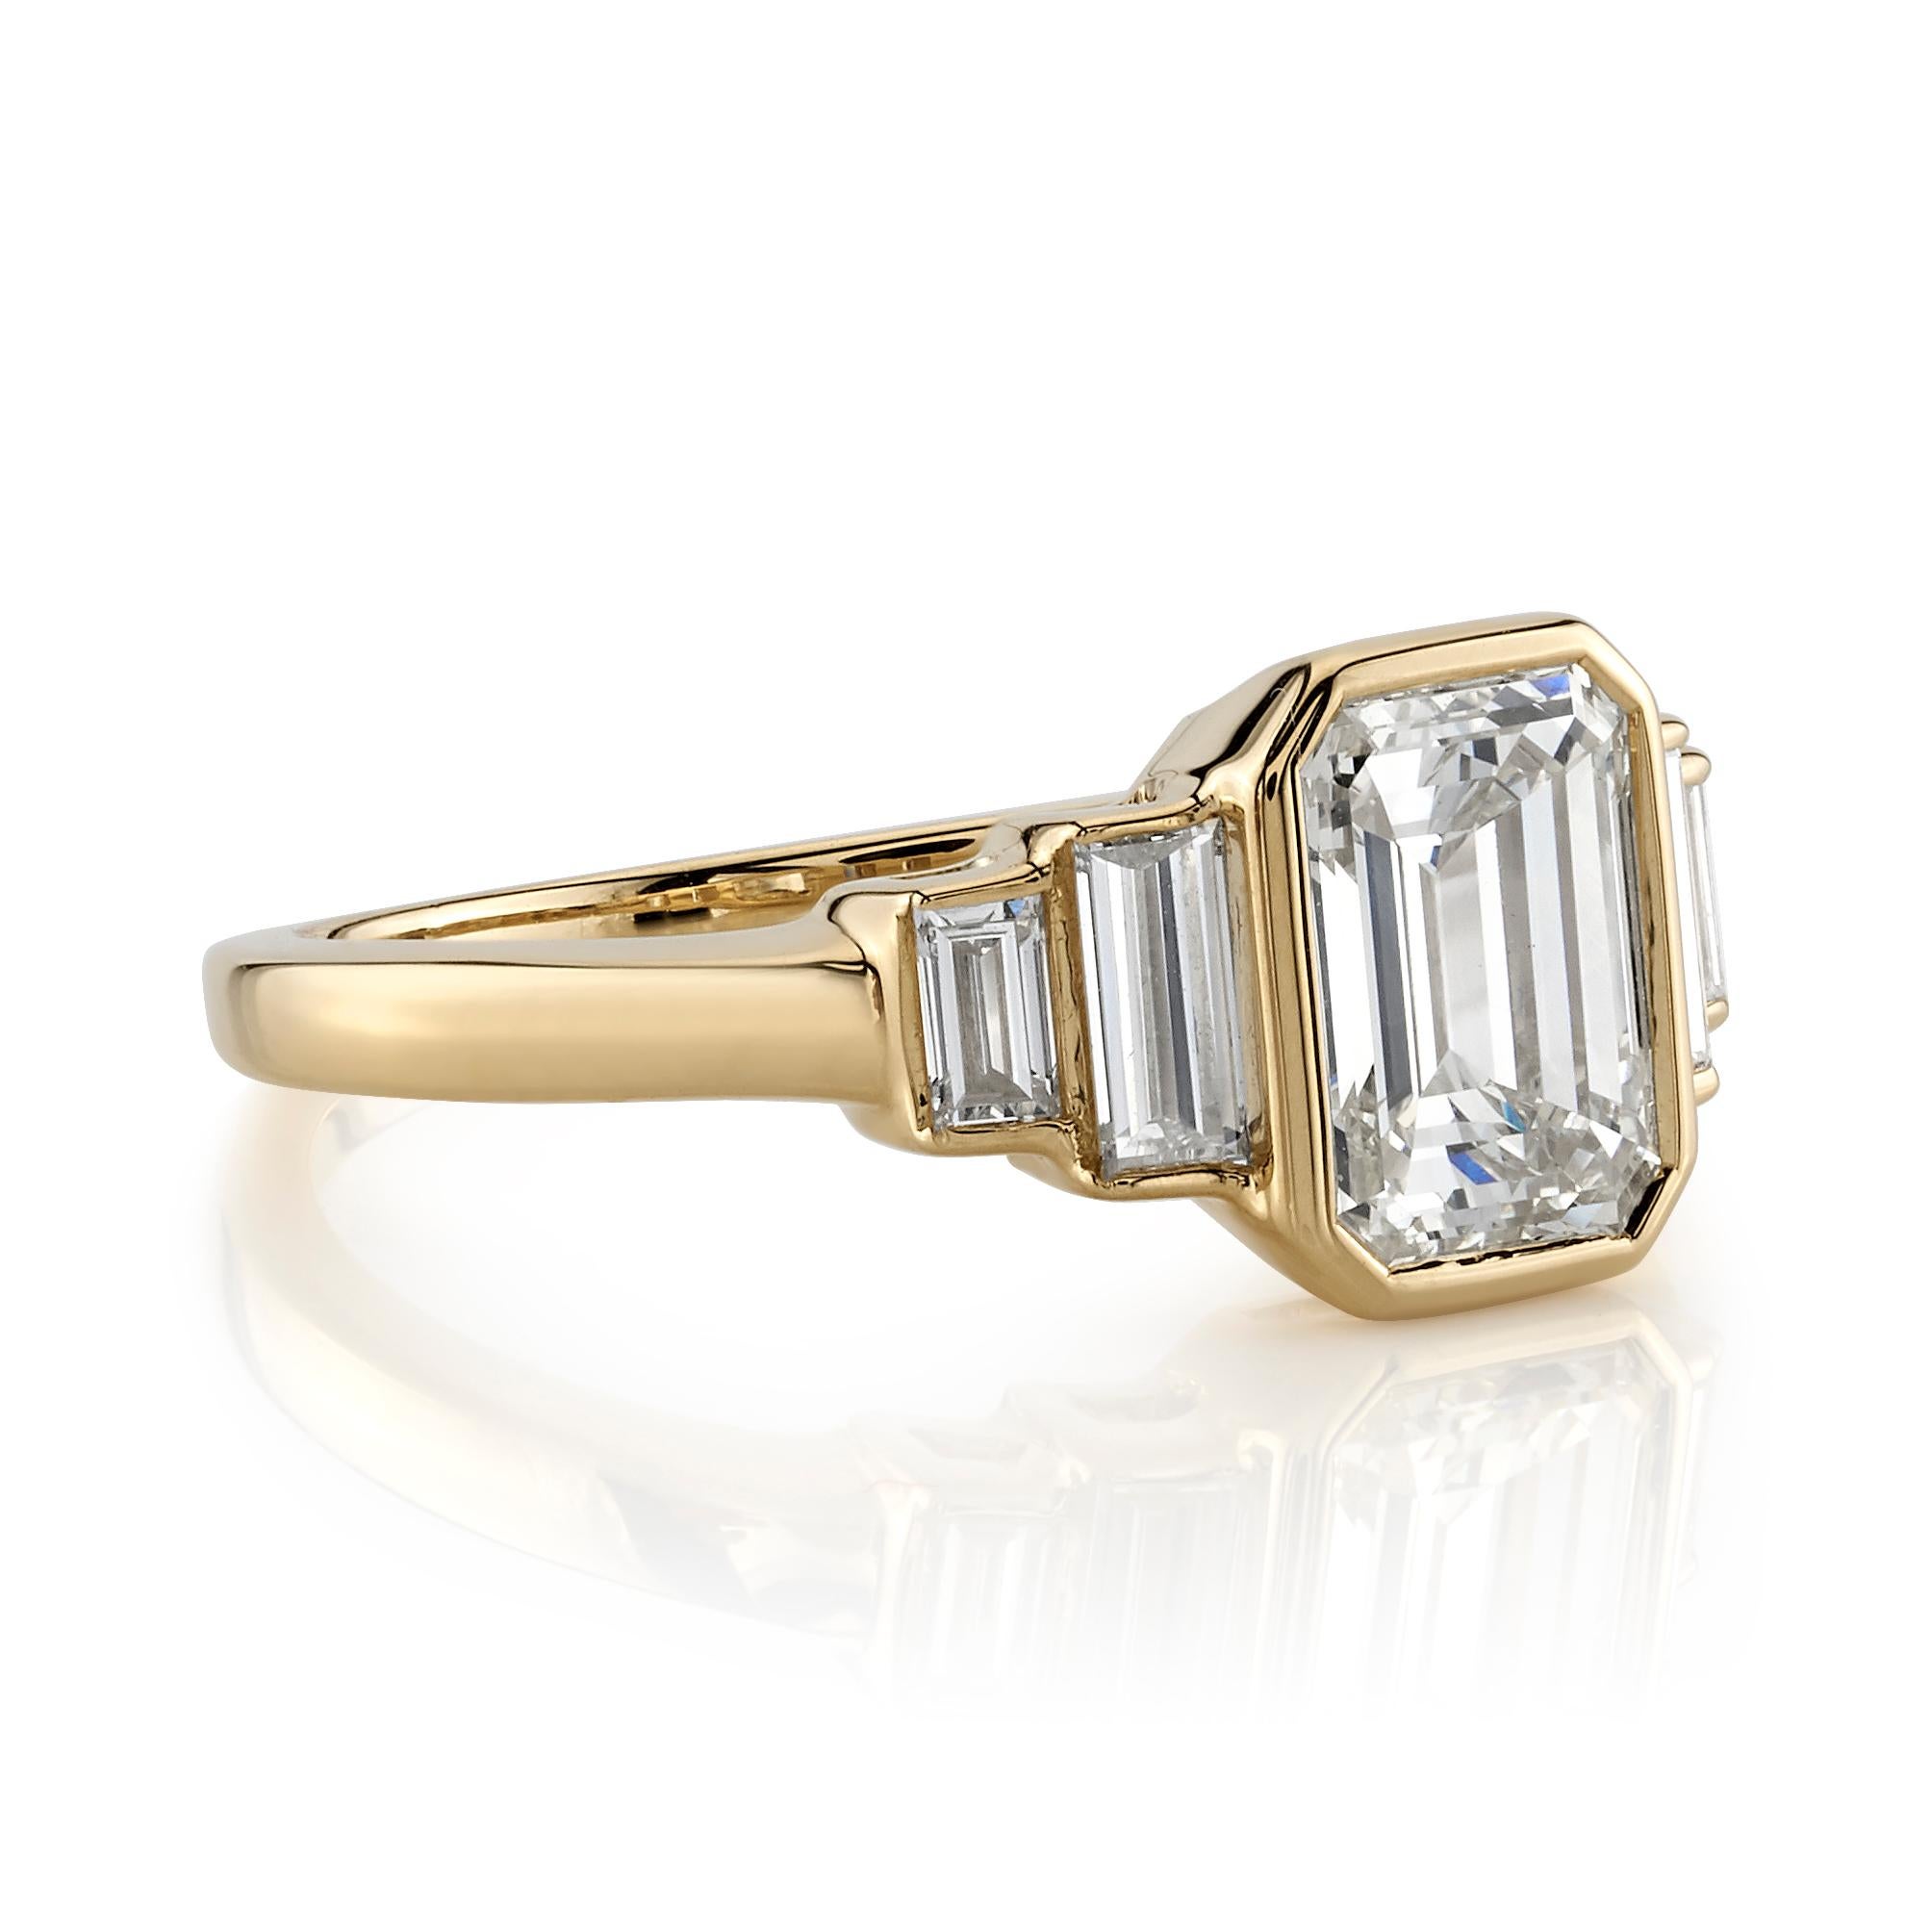 2.07ct K/VVS1 GIA certified emerald cut diamond with 0.57ctw baguette cut accent diamonds bezel set in a handcrafted 18K yellow gold mounting.

 